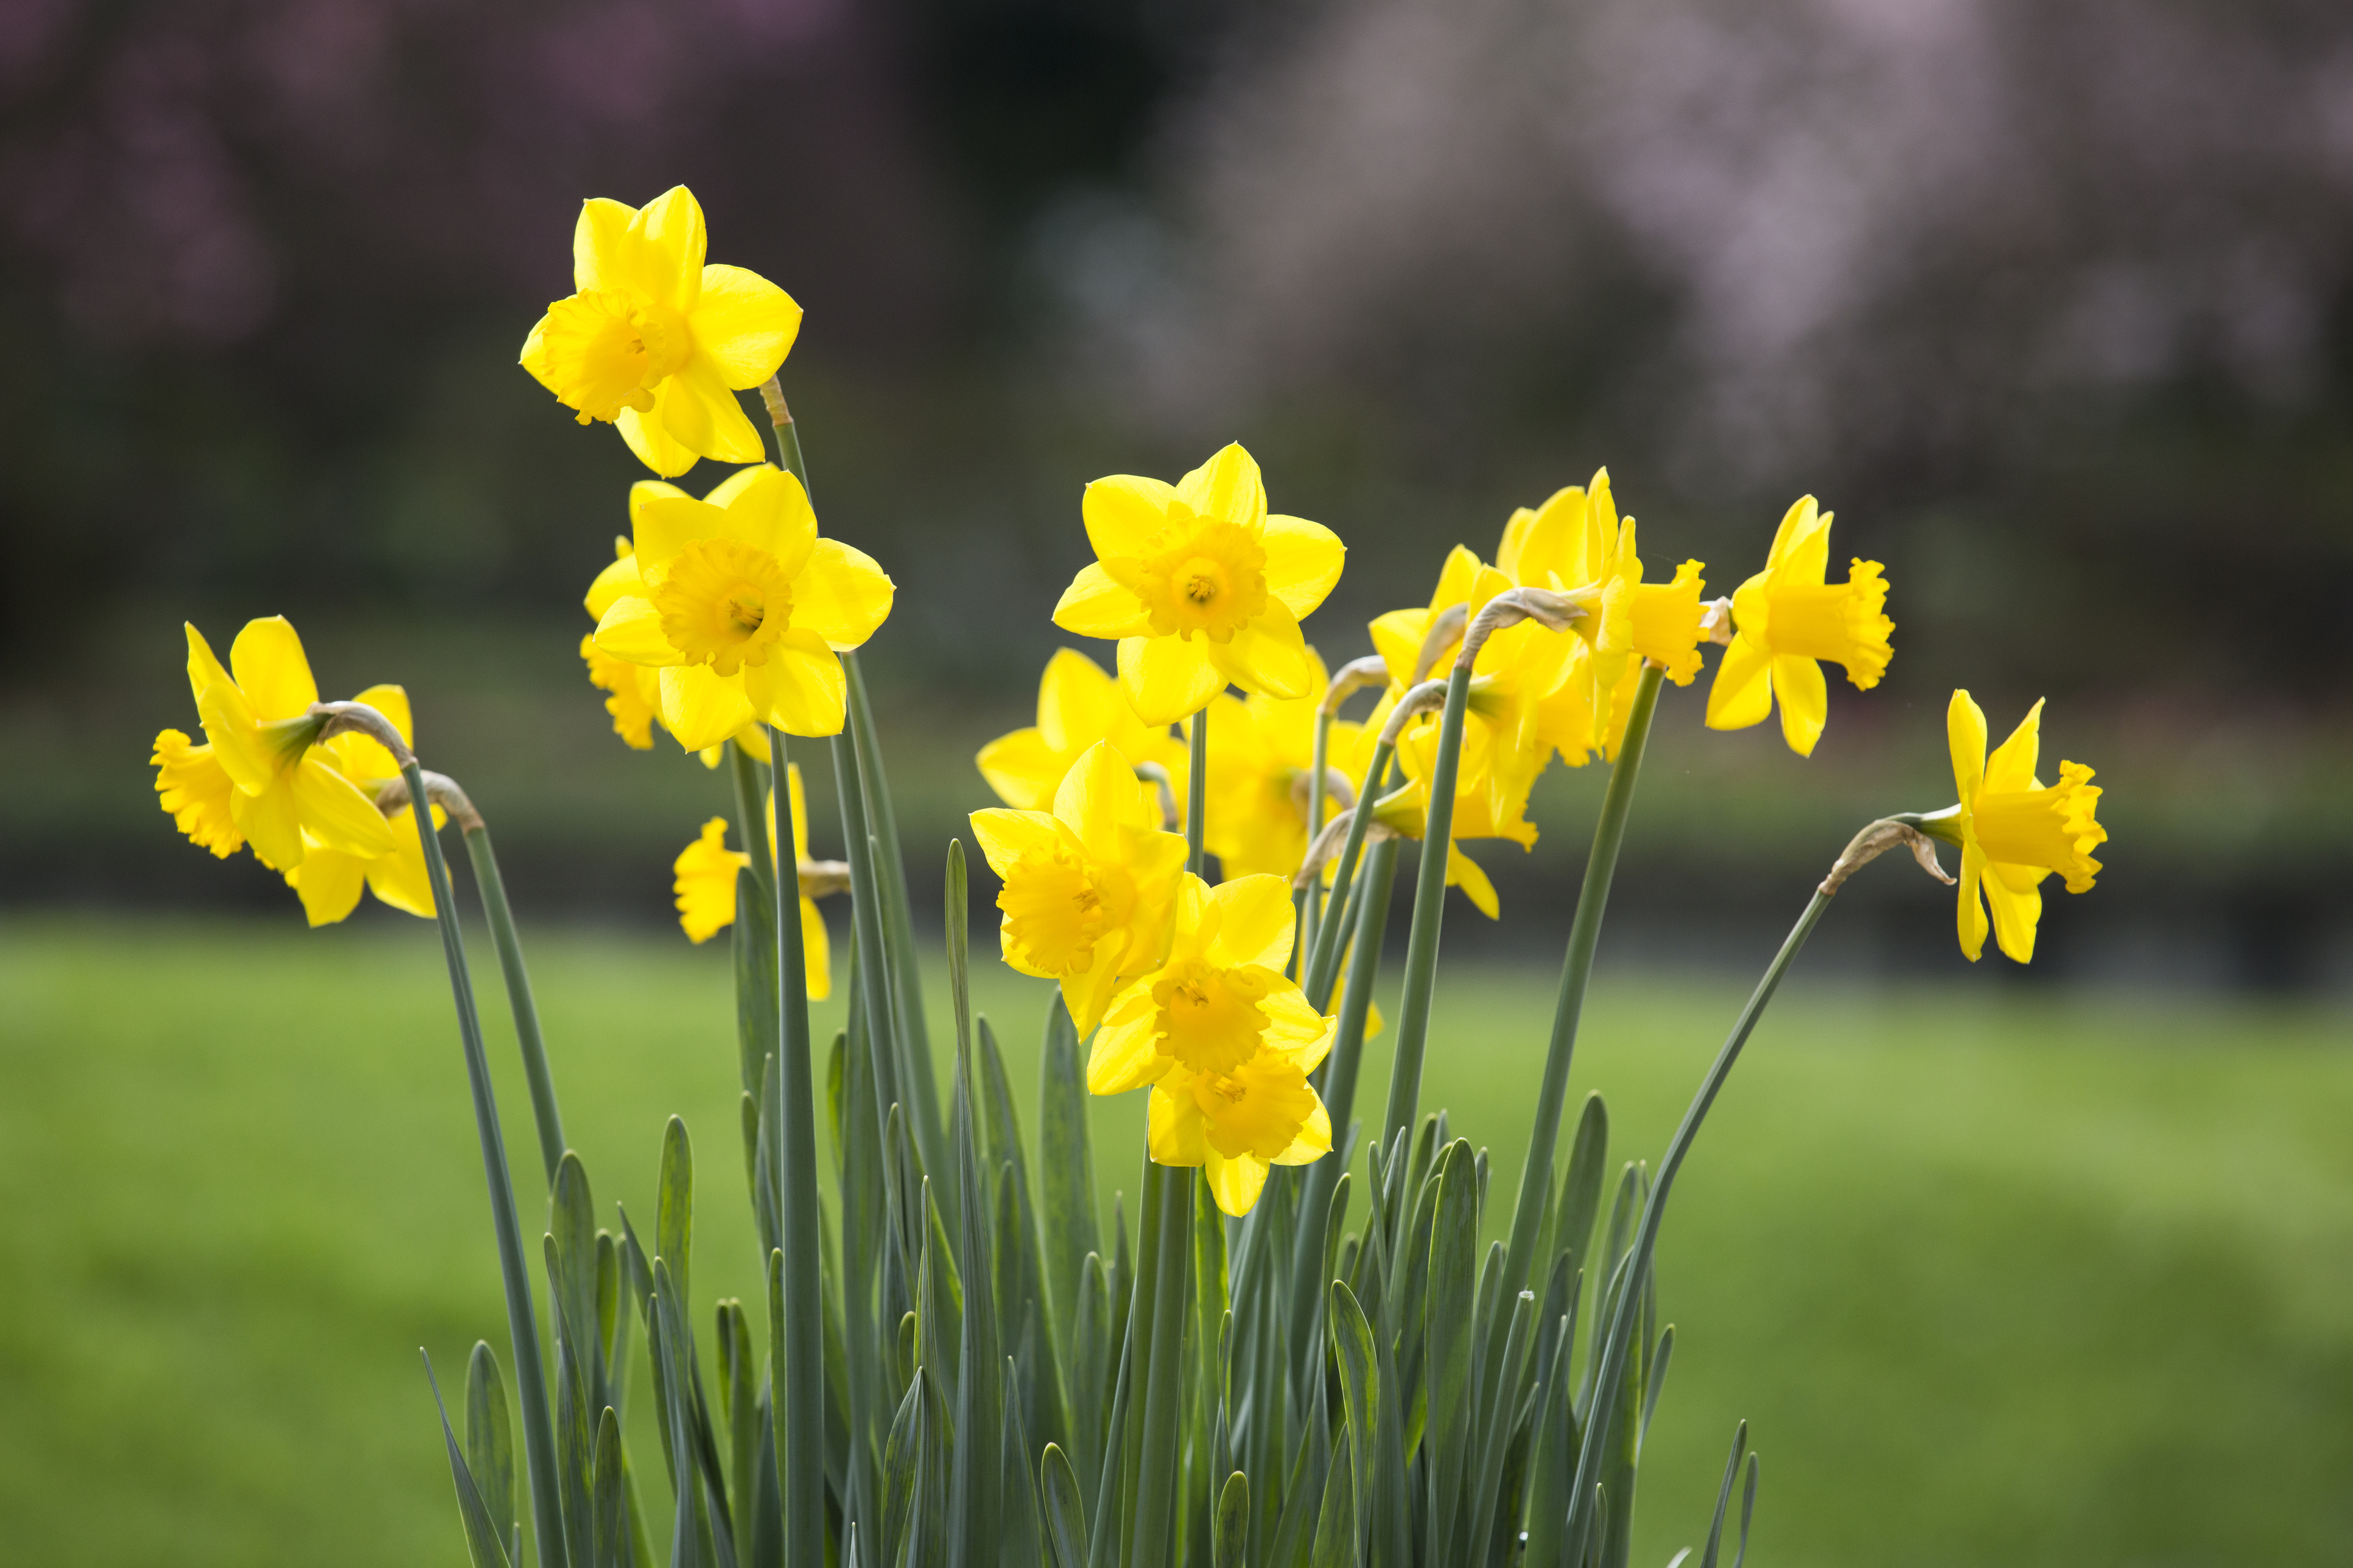 Daffodils can spark memories (Thinkstock/PA)